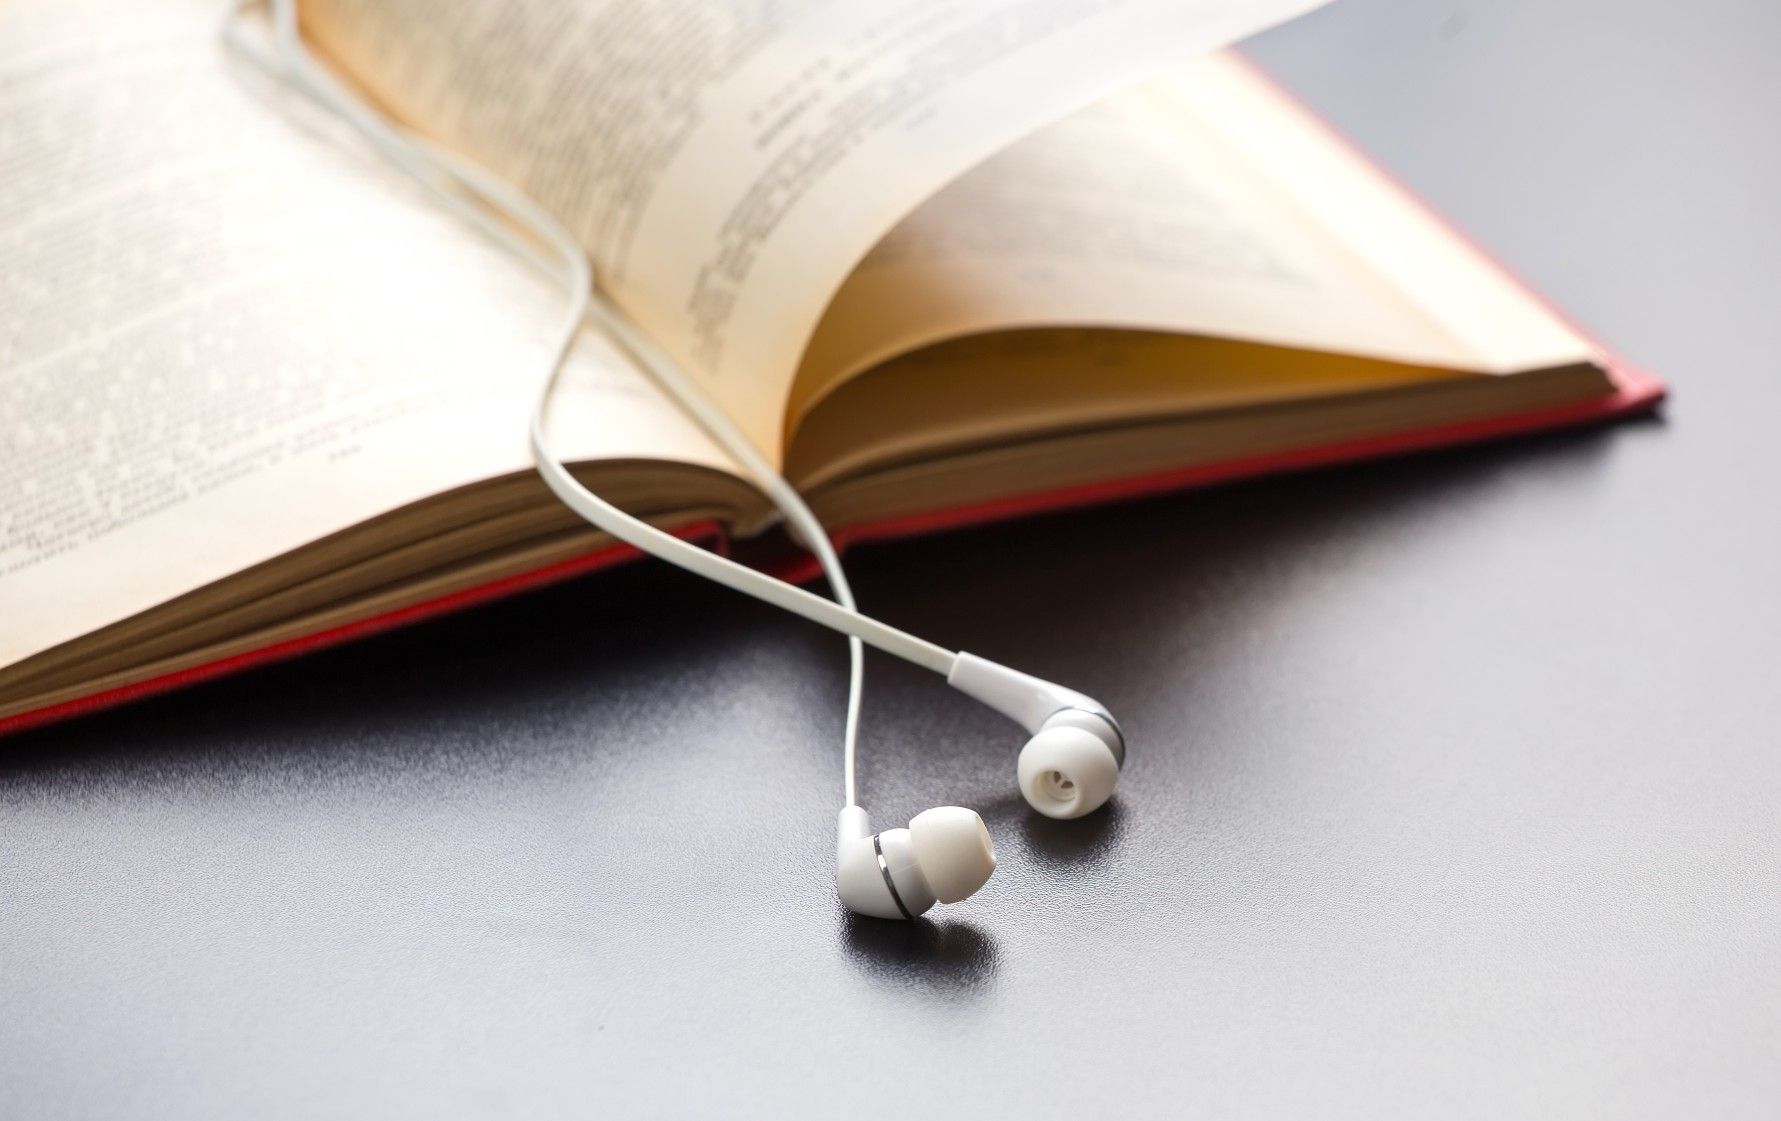 A set of white earbuds lie across an open book - Audible free trial